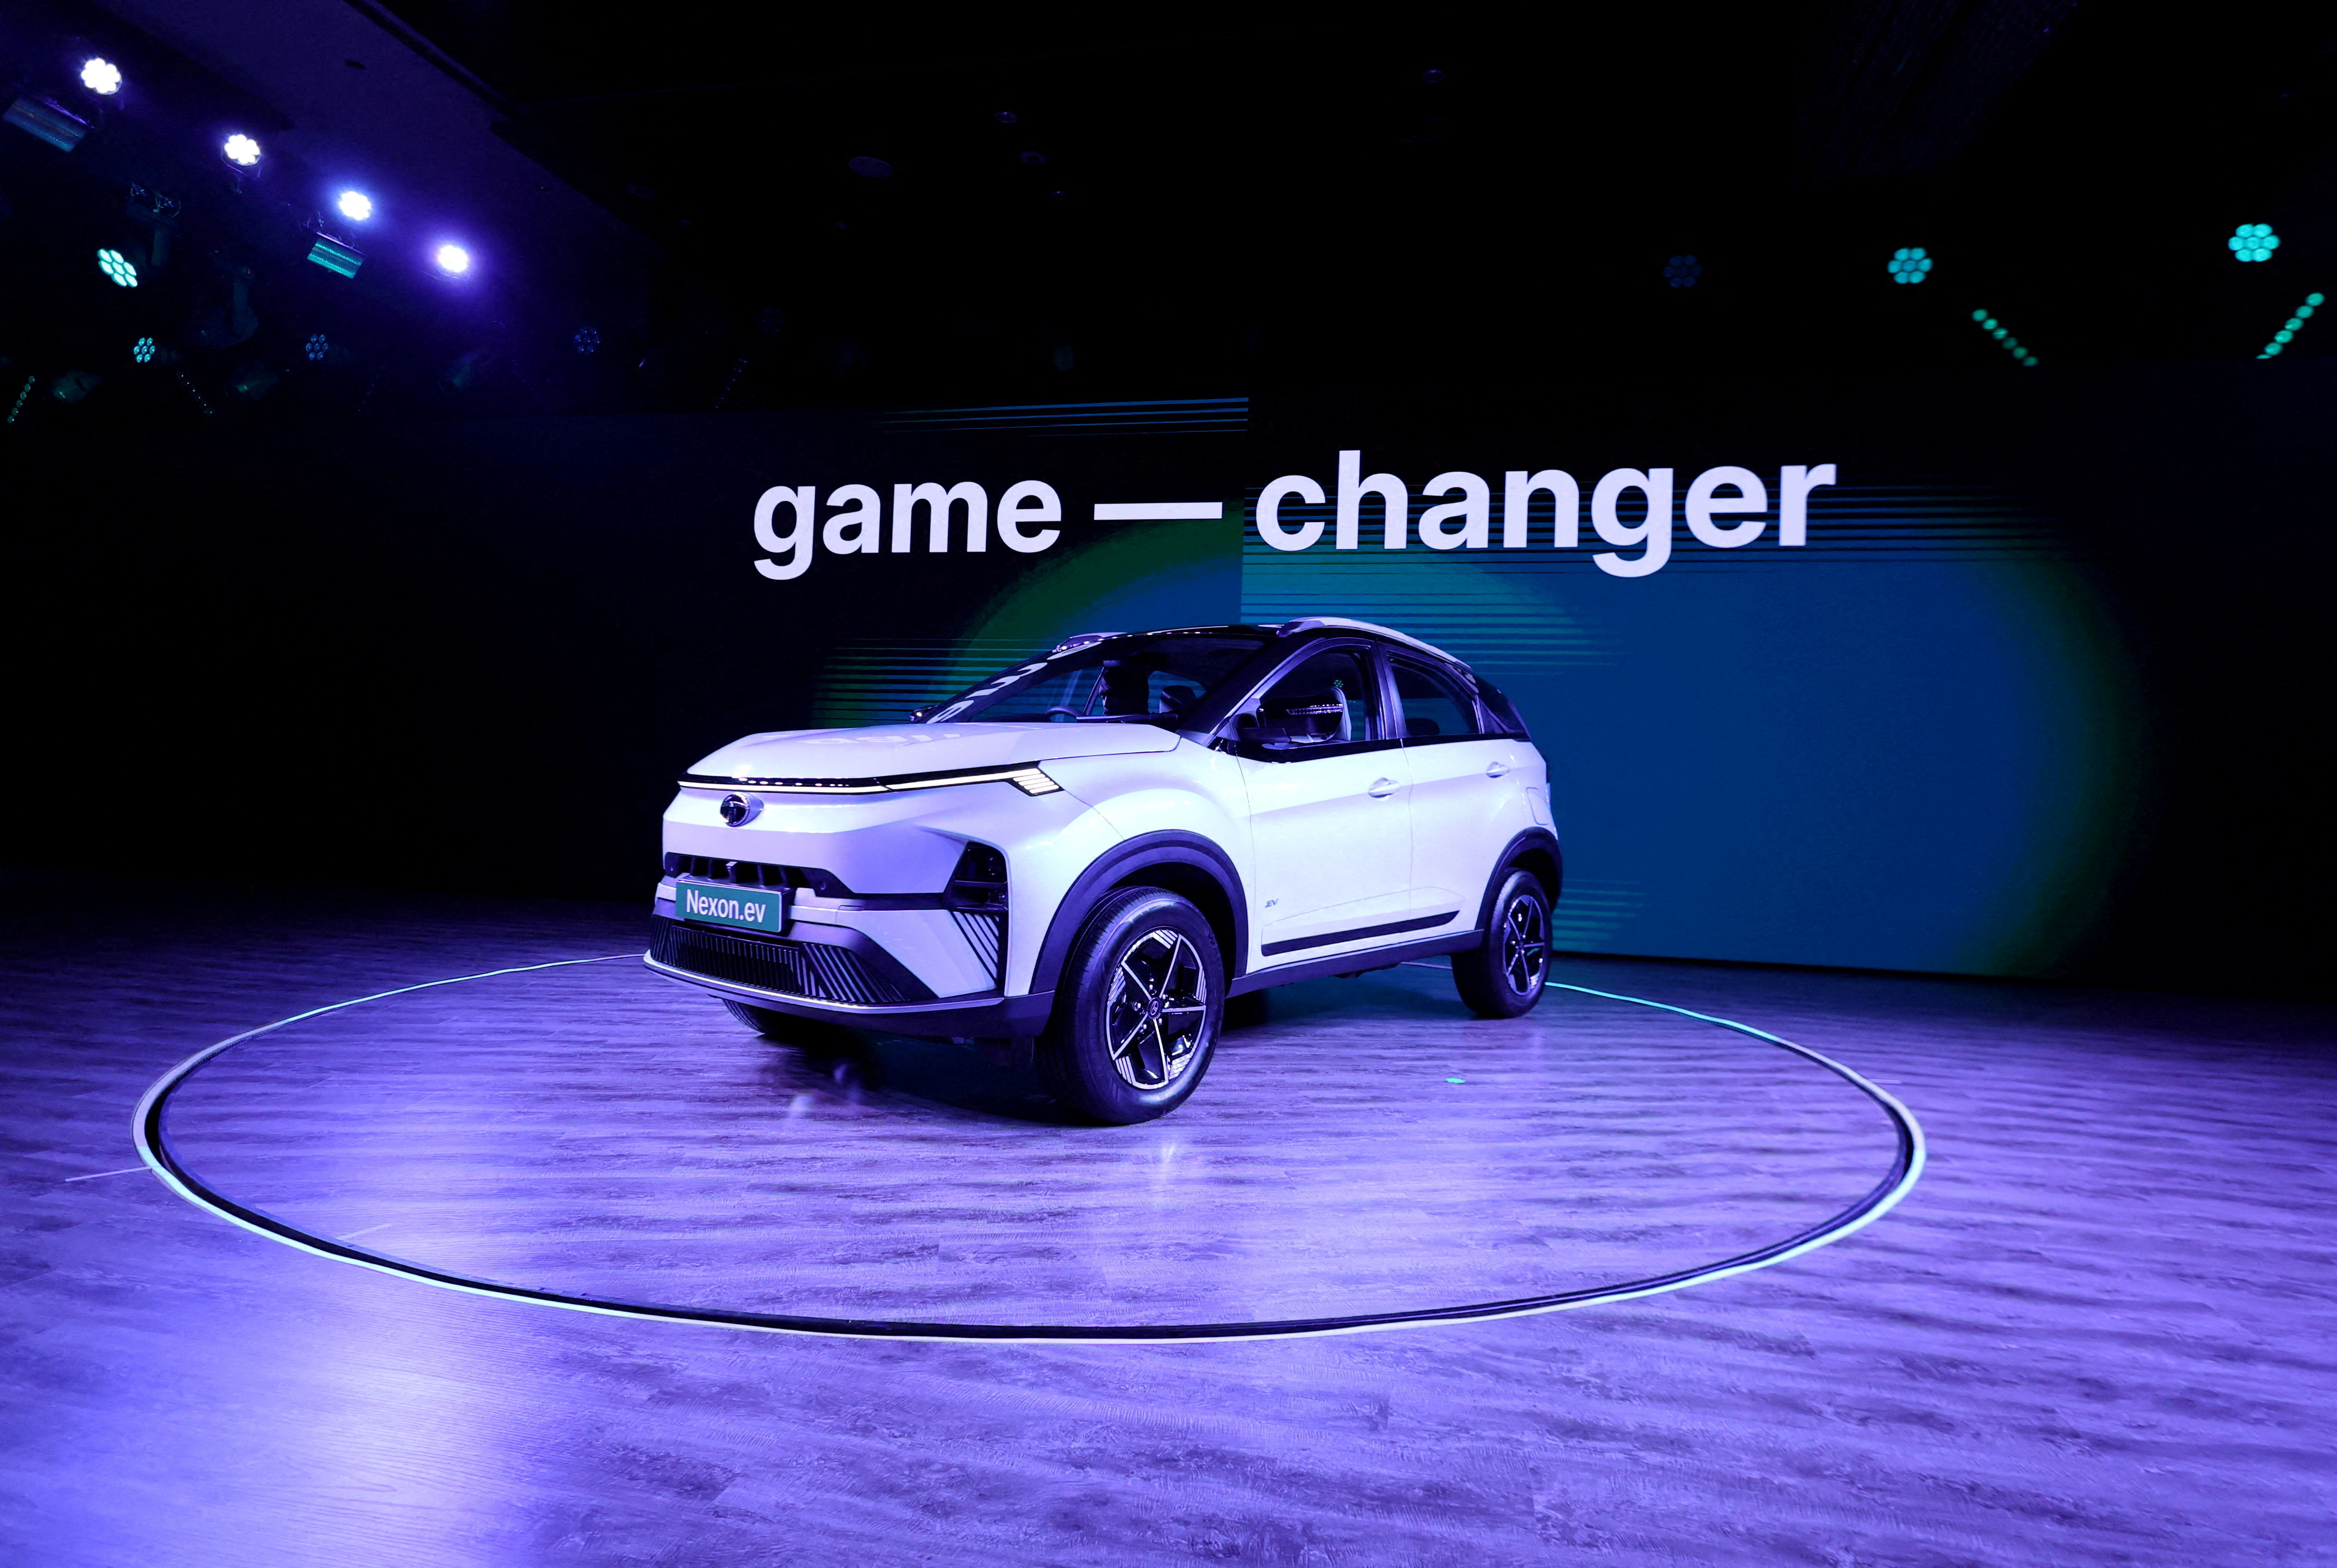 Tata Motors' electric vehicle Nexon.ev is displayed during its launch in New Delhi